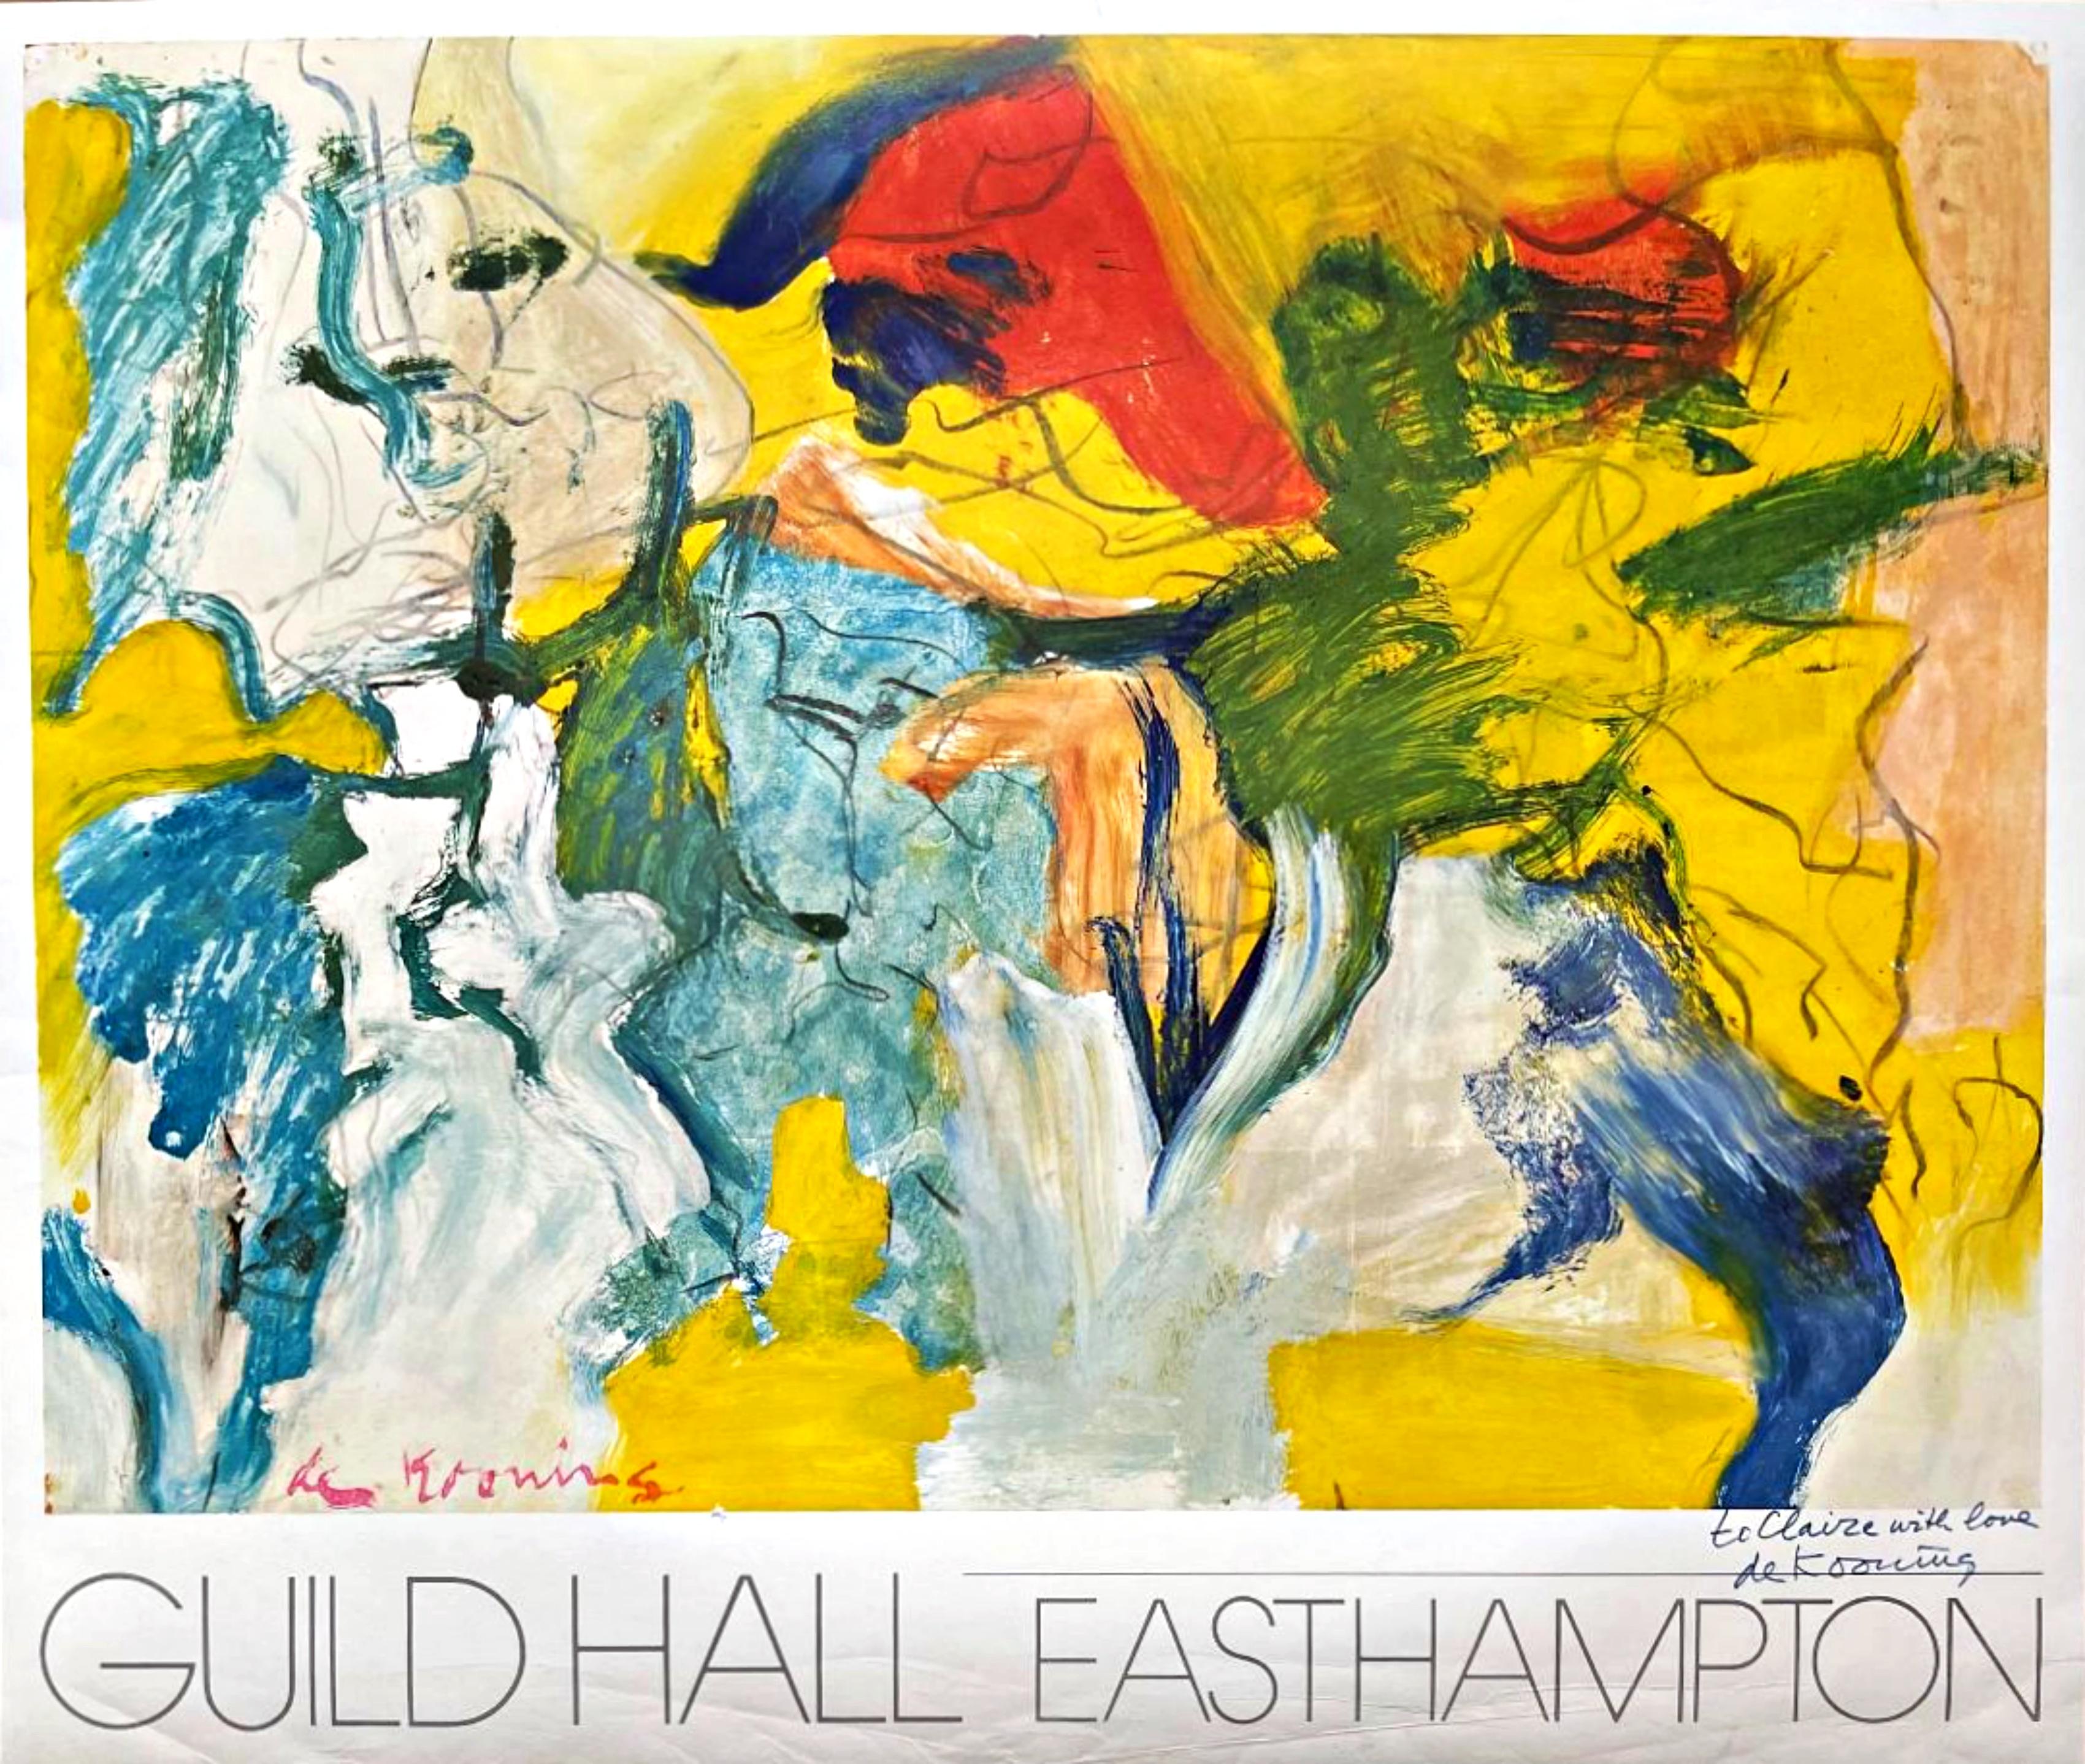 Guild Hall, Easthampton (hand signed and inscribed by de Kooning)